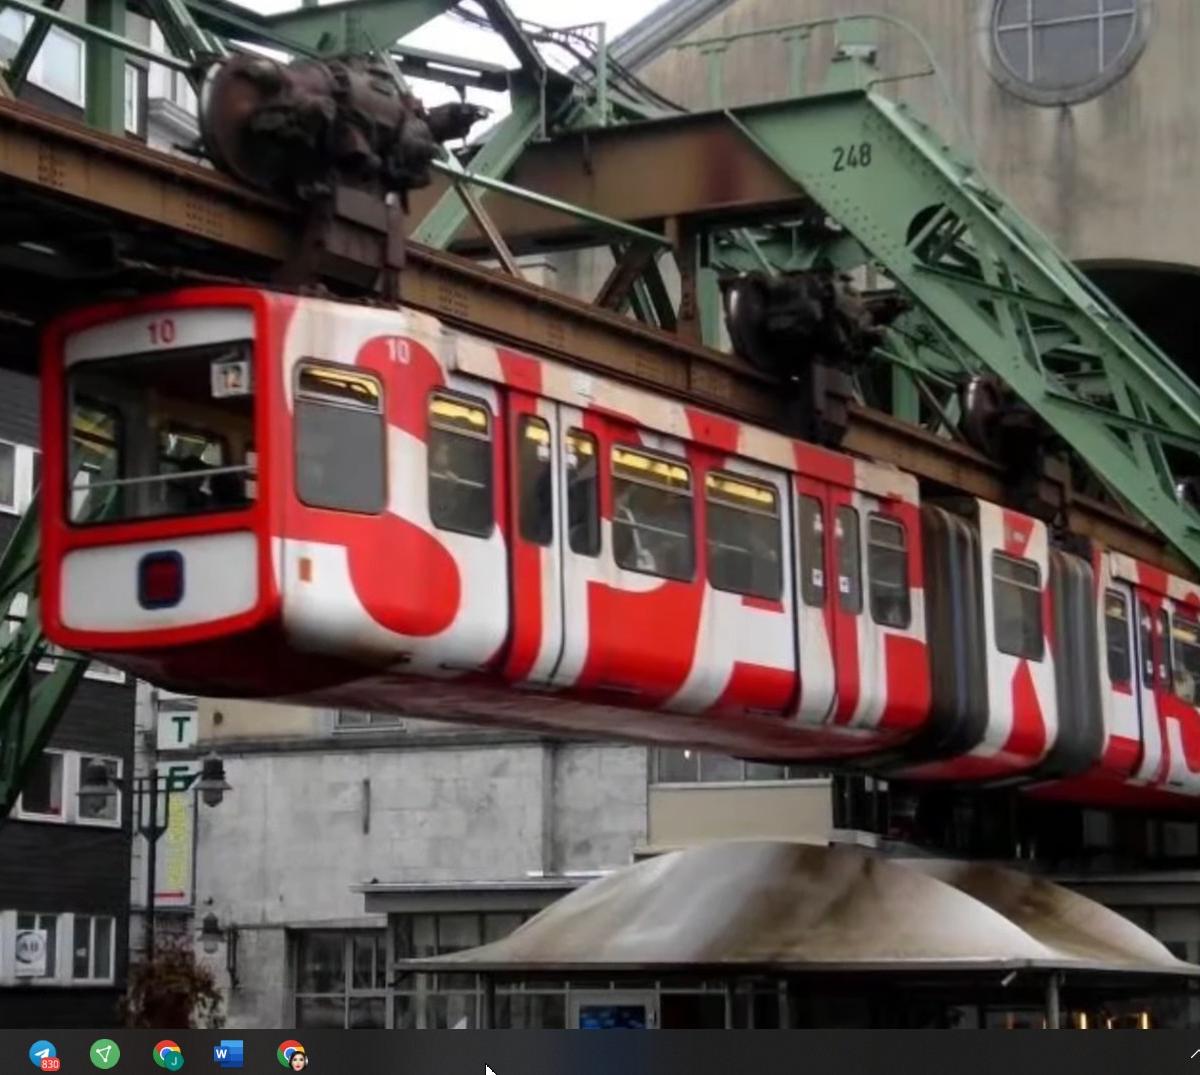 Wuppertal suspension train - the most unusual transport in Germany